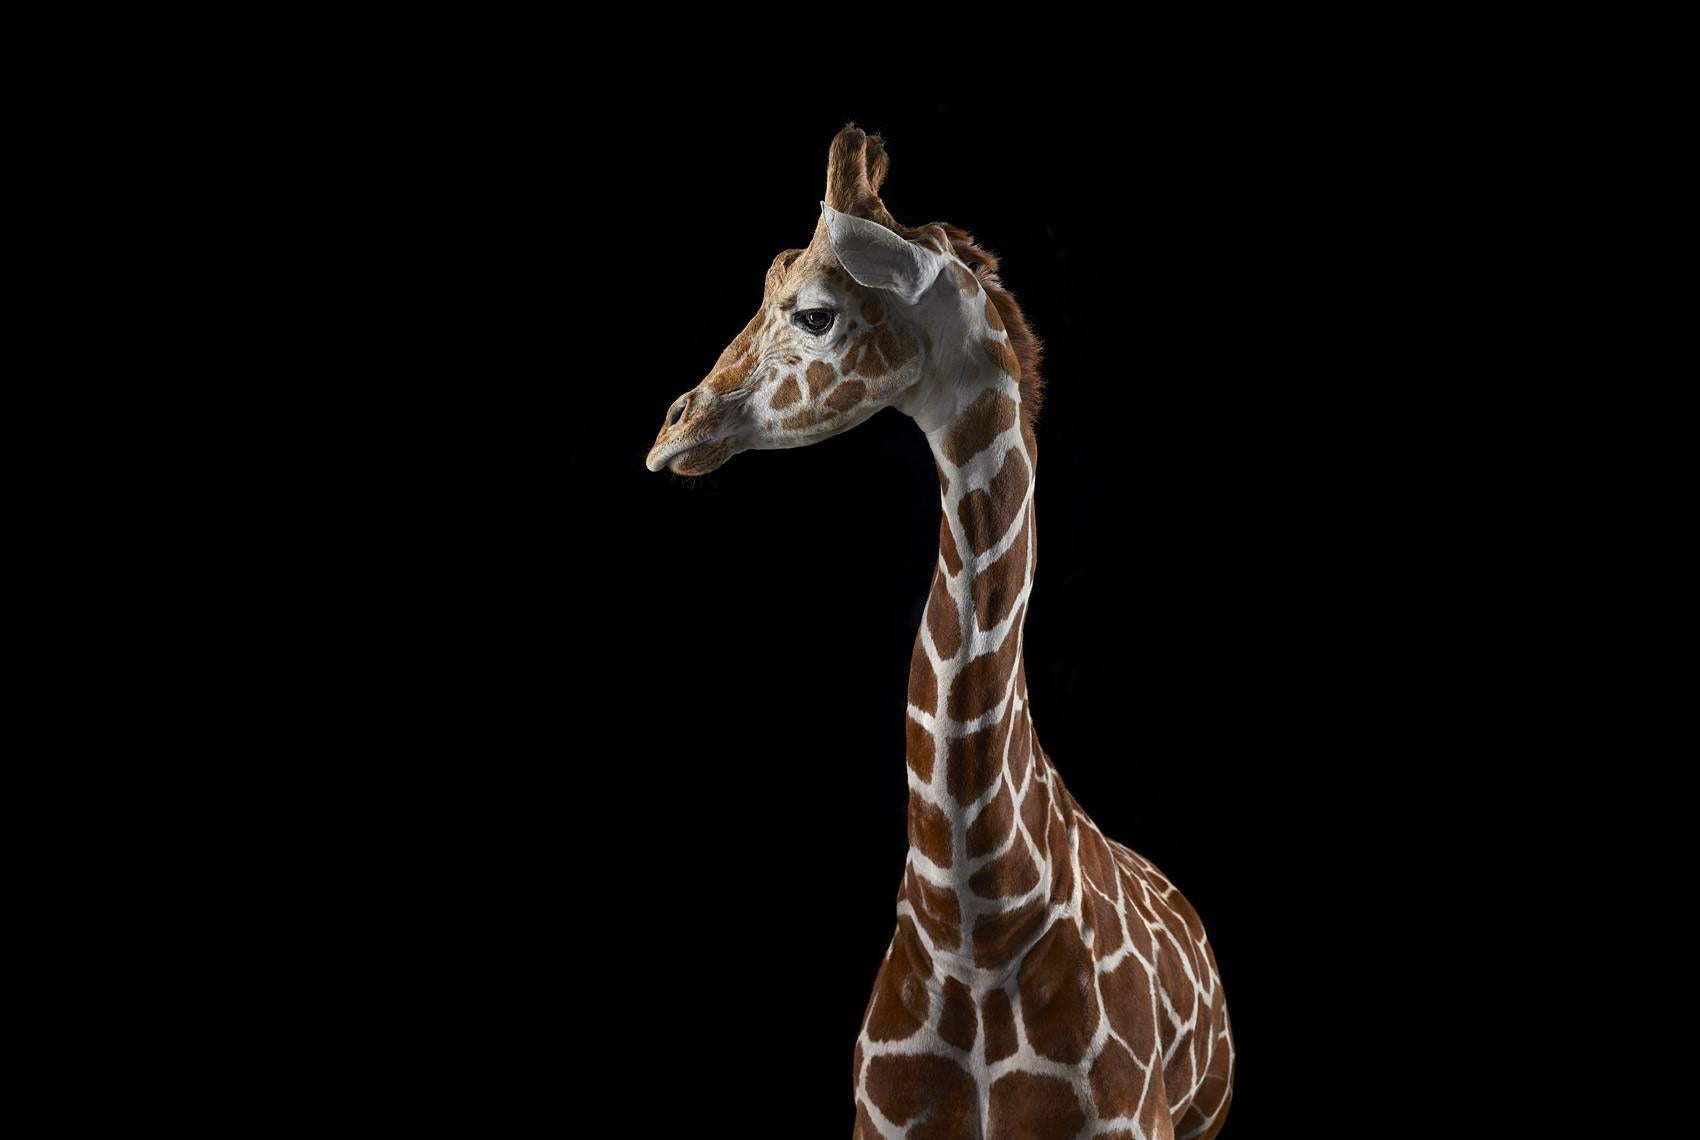 'Giraffe #3, Los Angeles, CA, 2011' is a limited-edition photograph by contemporary artist Brad Wilson from the ‘Affinity’ series which features studio portraits of wild animals. 

This photograph is sold unframed as a print only. It is available in